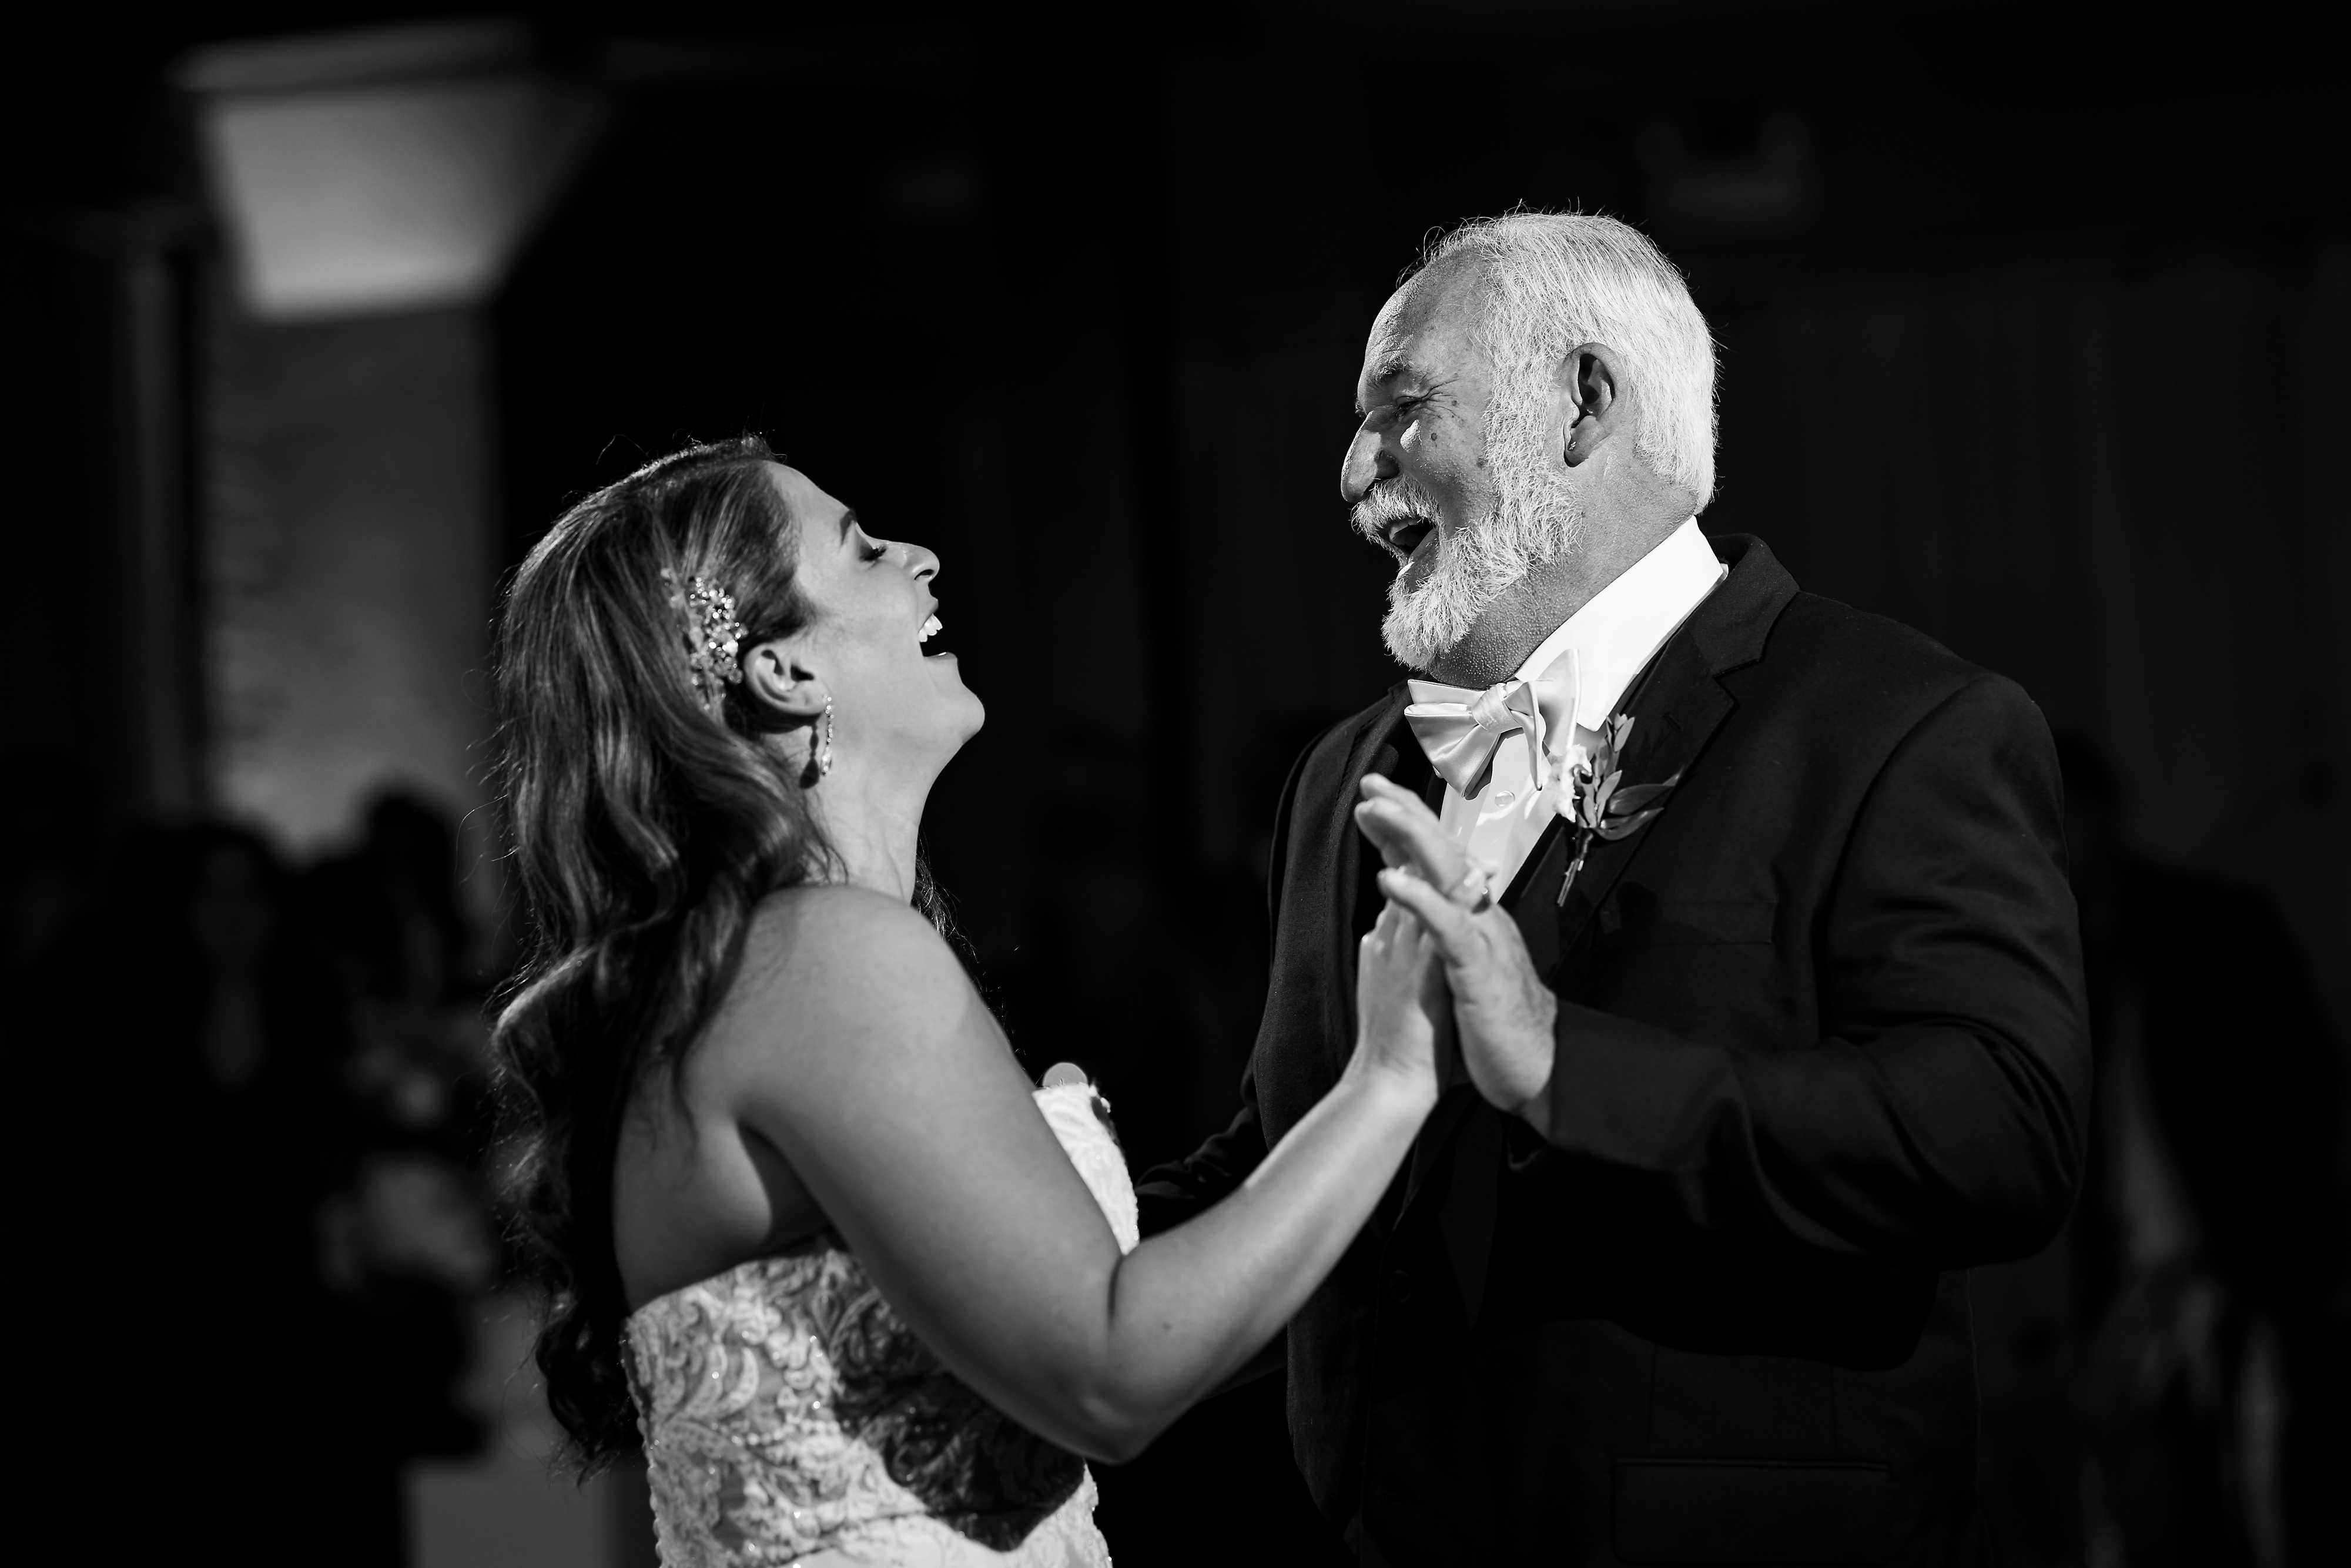 Bride dances with father during wedding reception at Artifact Events in Chicago.